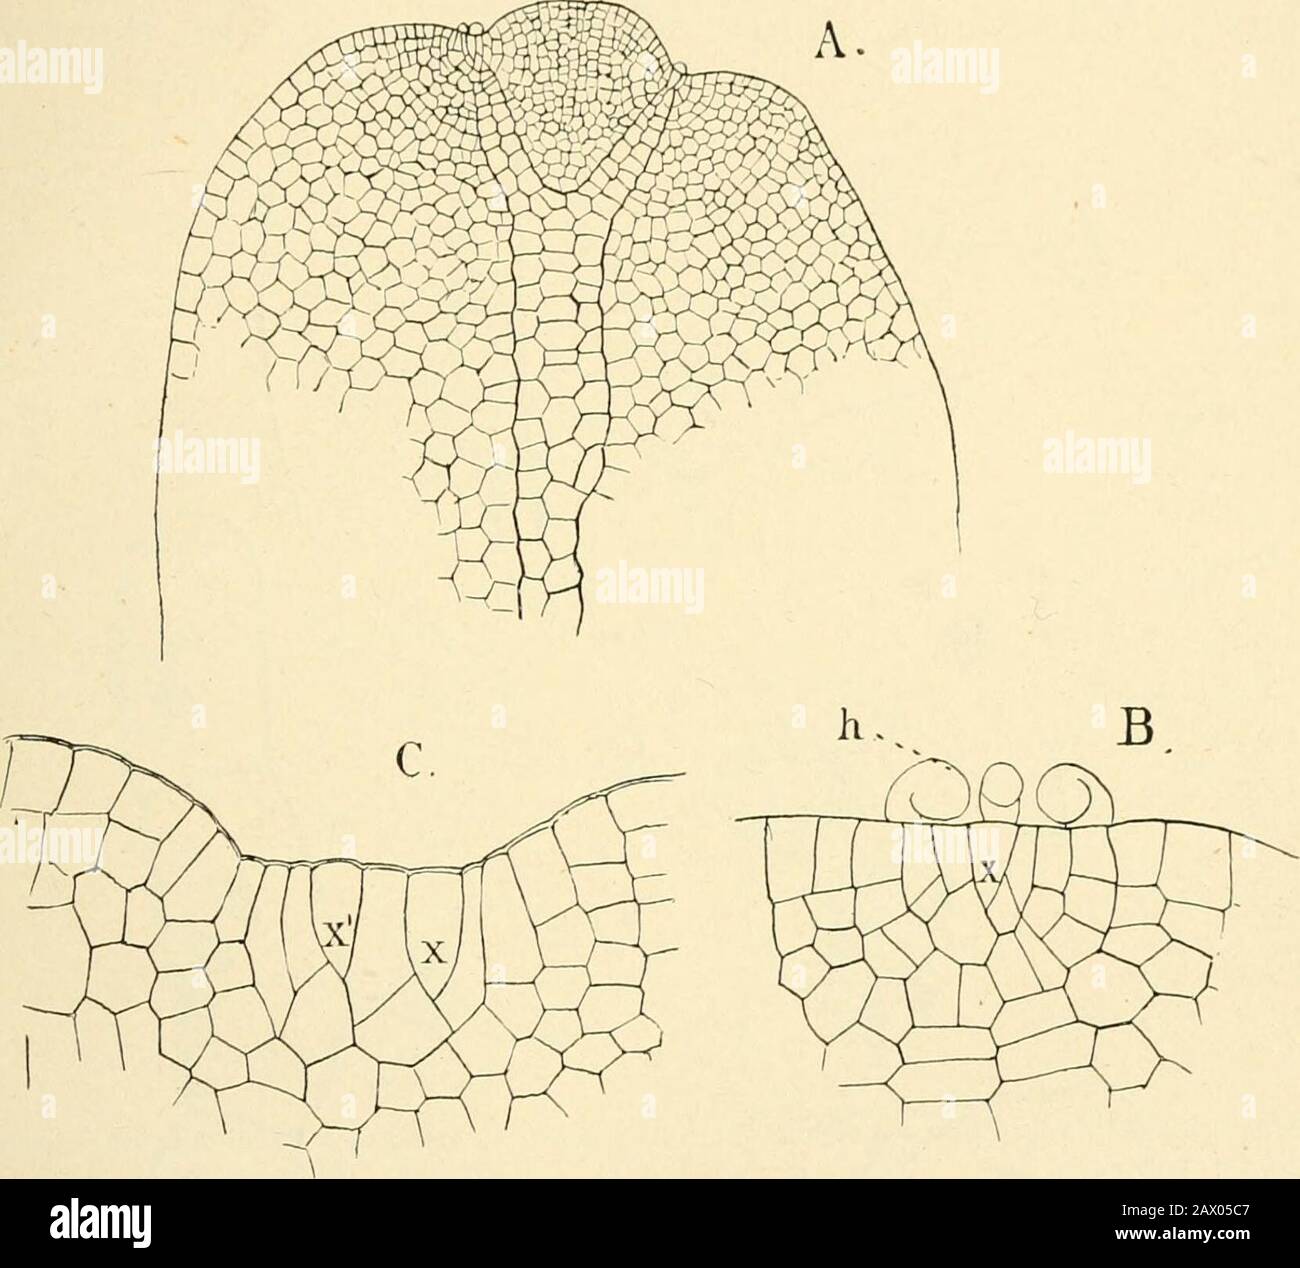 The structure & development of the mosses and ferns (Archegoniatae) . t-hairs are developed fromthe ventral surface, especially of the midrib, when that is present. Aneura is of interest as showing the only case amongthe Bryophytes of structures that may be compared to thezoospores of the green Algae. In A. multifida Goebel * dis- 1 Goebel (14). 2 On the fertilisation of the archegonium q{ Riella, see Kruch (i). • Two-sided is hardly a strict equivalent for the German zweischneidig,but will be used here in the same sense, i.e. an apical cell from which two sets oflateral segments are cut off. Stock Photo